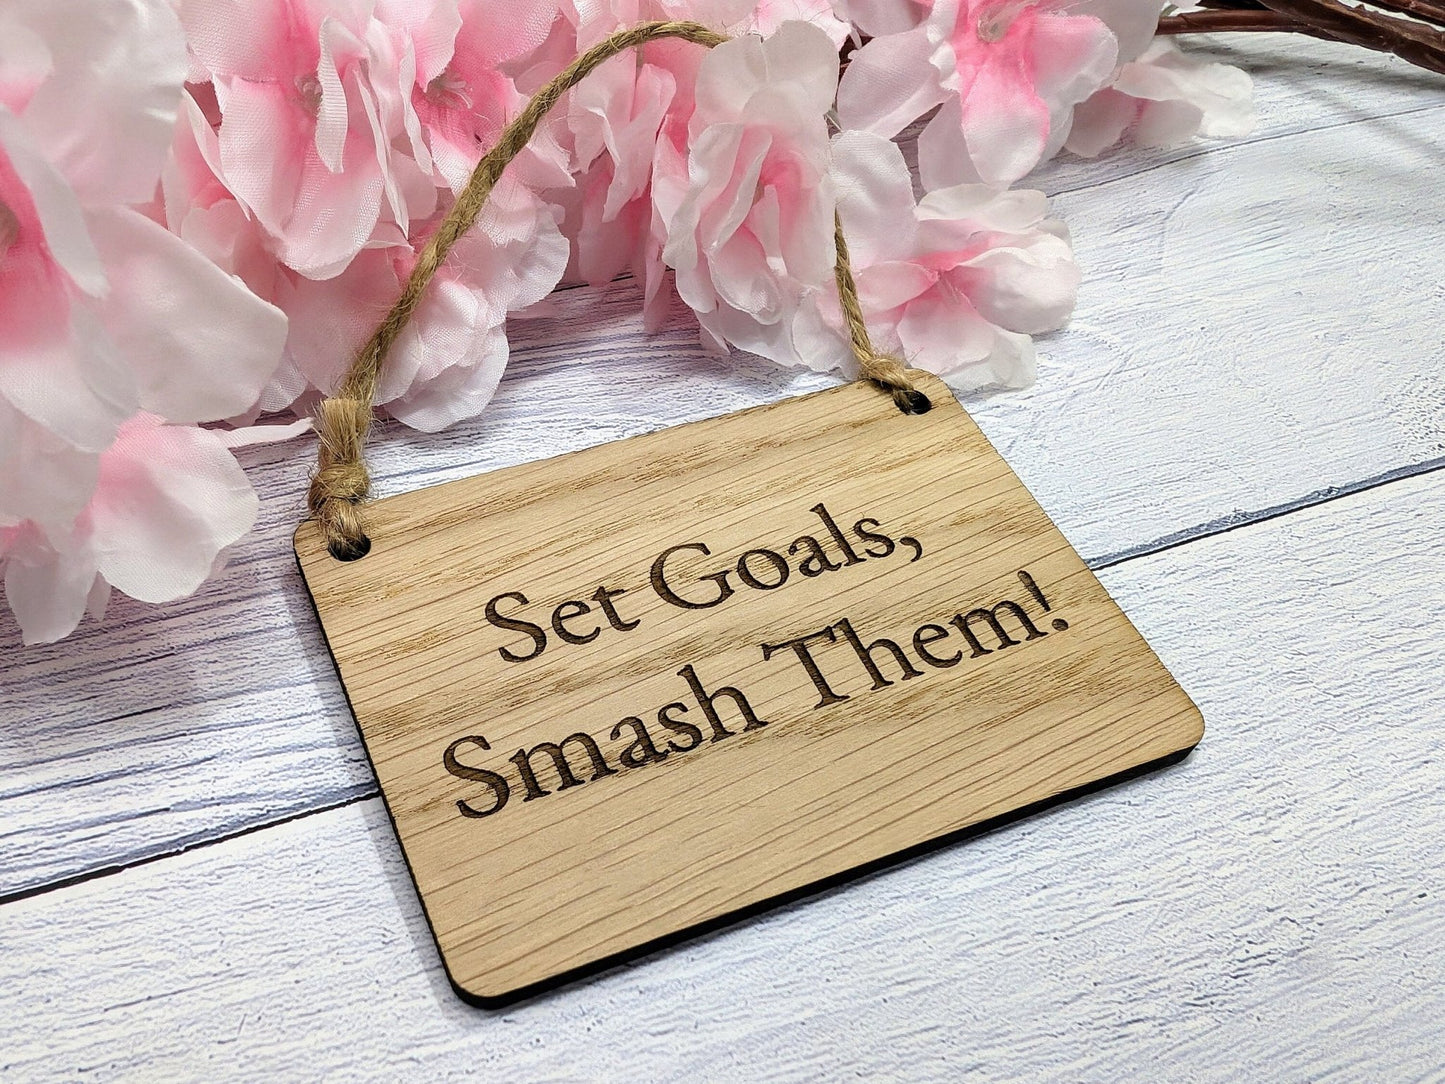 Set Goals, Smash Them - Motivational Oak Sign, Handcrafted in Wales, Eco-Friendly - Choose Your Size - CherryGroveCraft